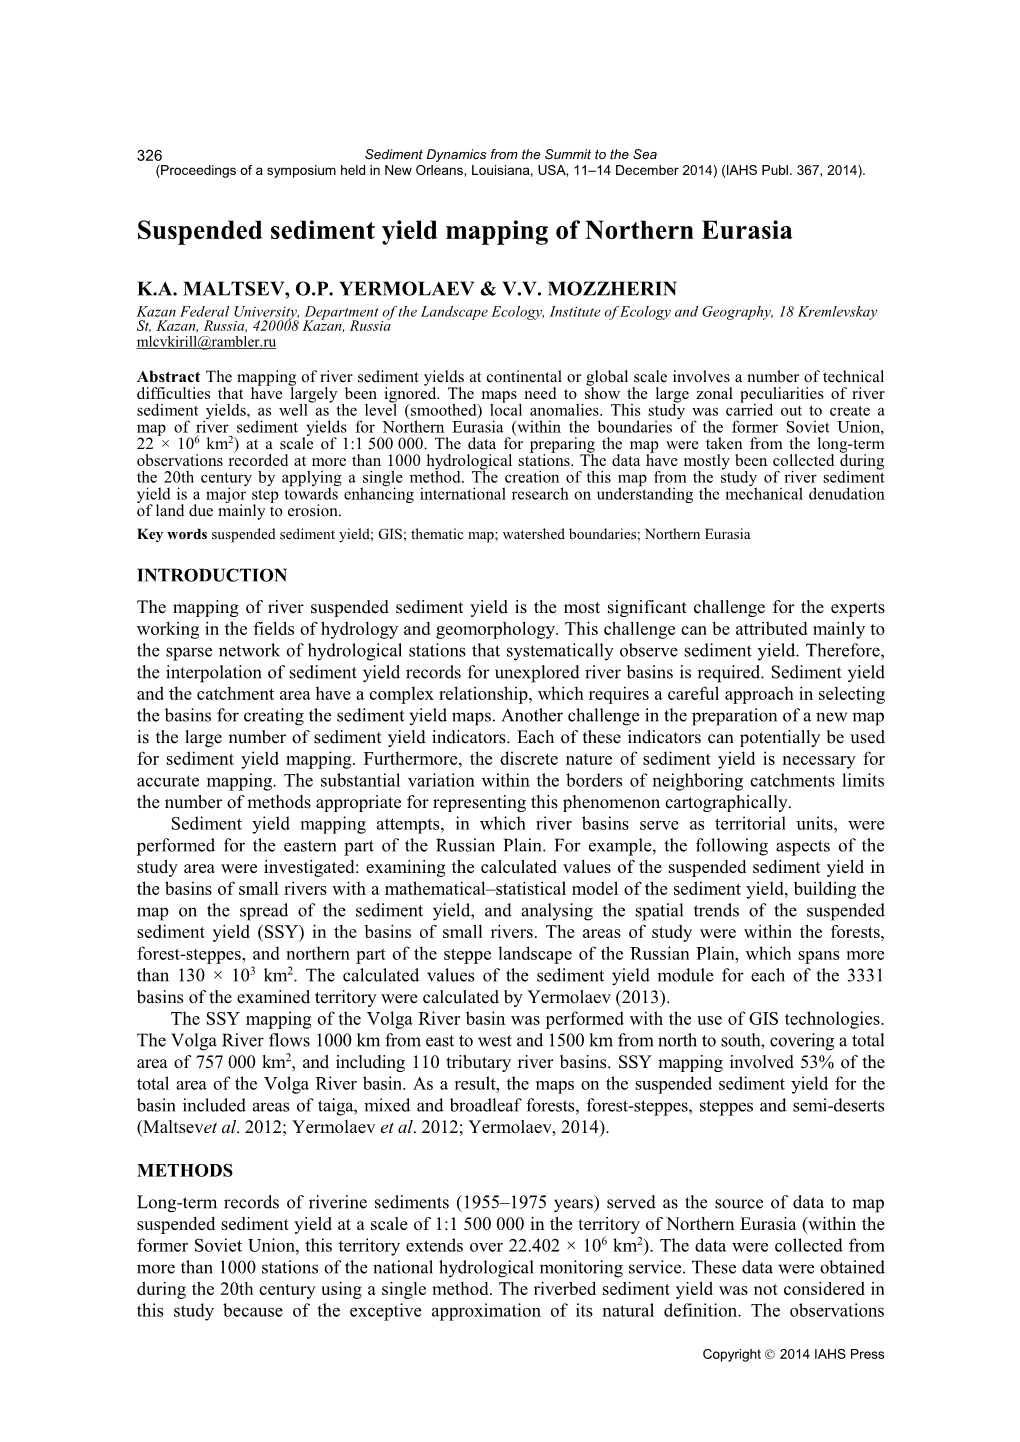 Suspended Sediment Yield Mapping of Northern Eurasia